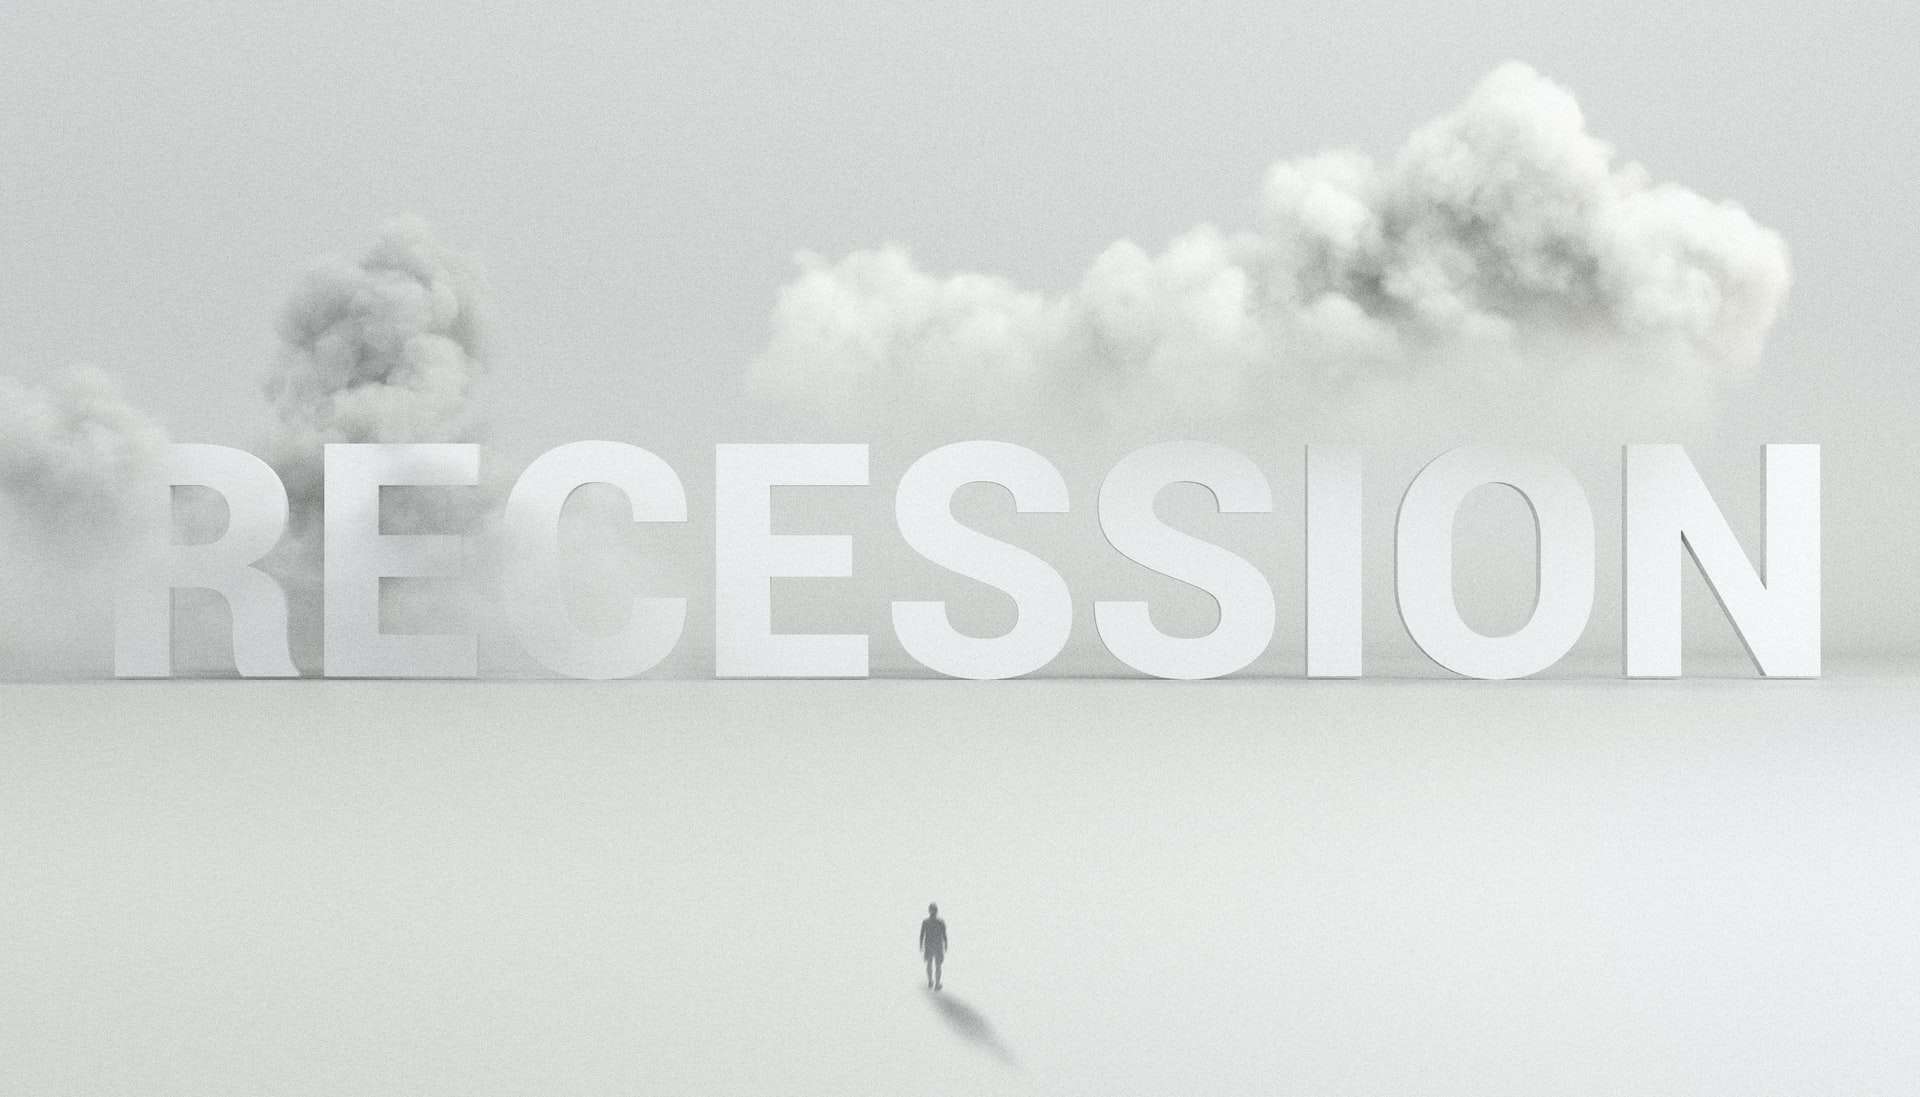 Recruiting in a recession: How the economy (re)shapes the global talent market